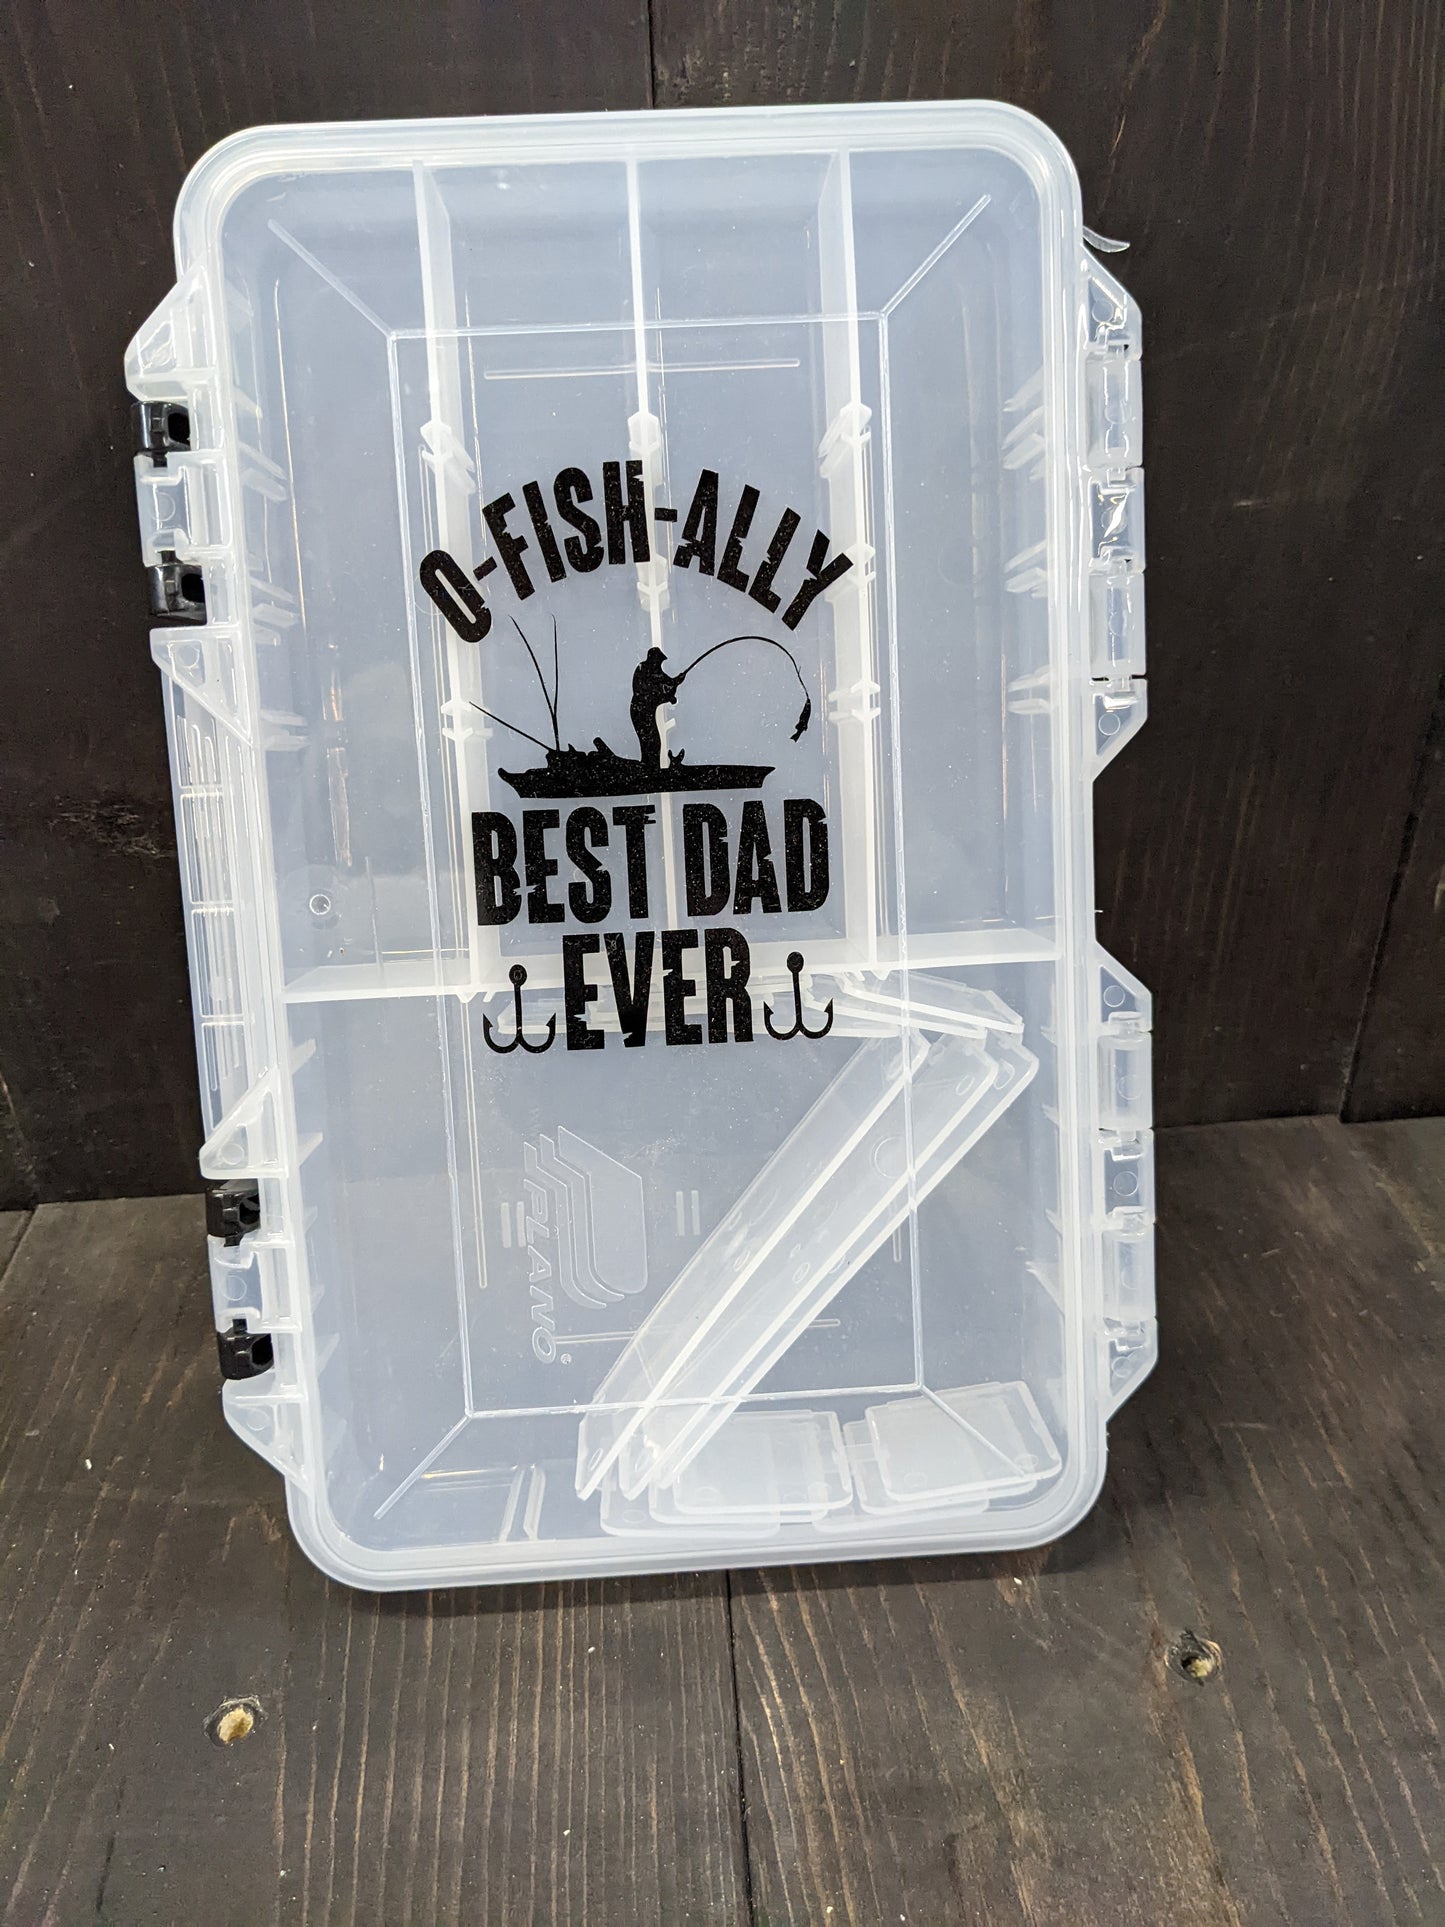 O-fish-ally best dad ever- tackle box